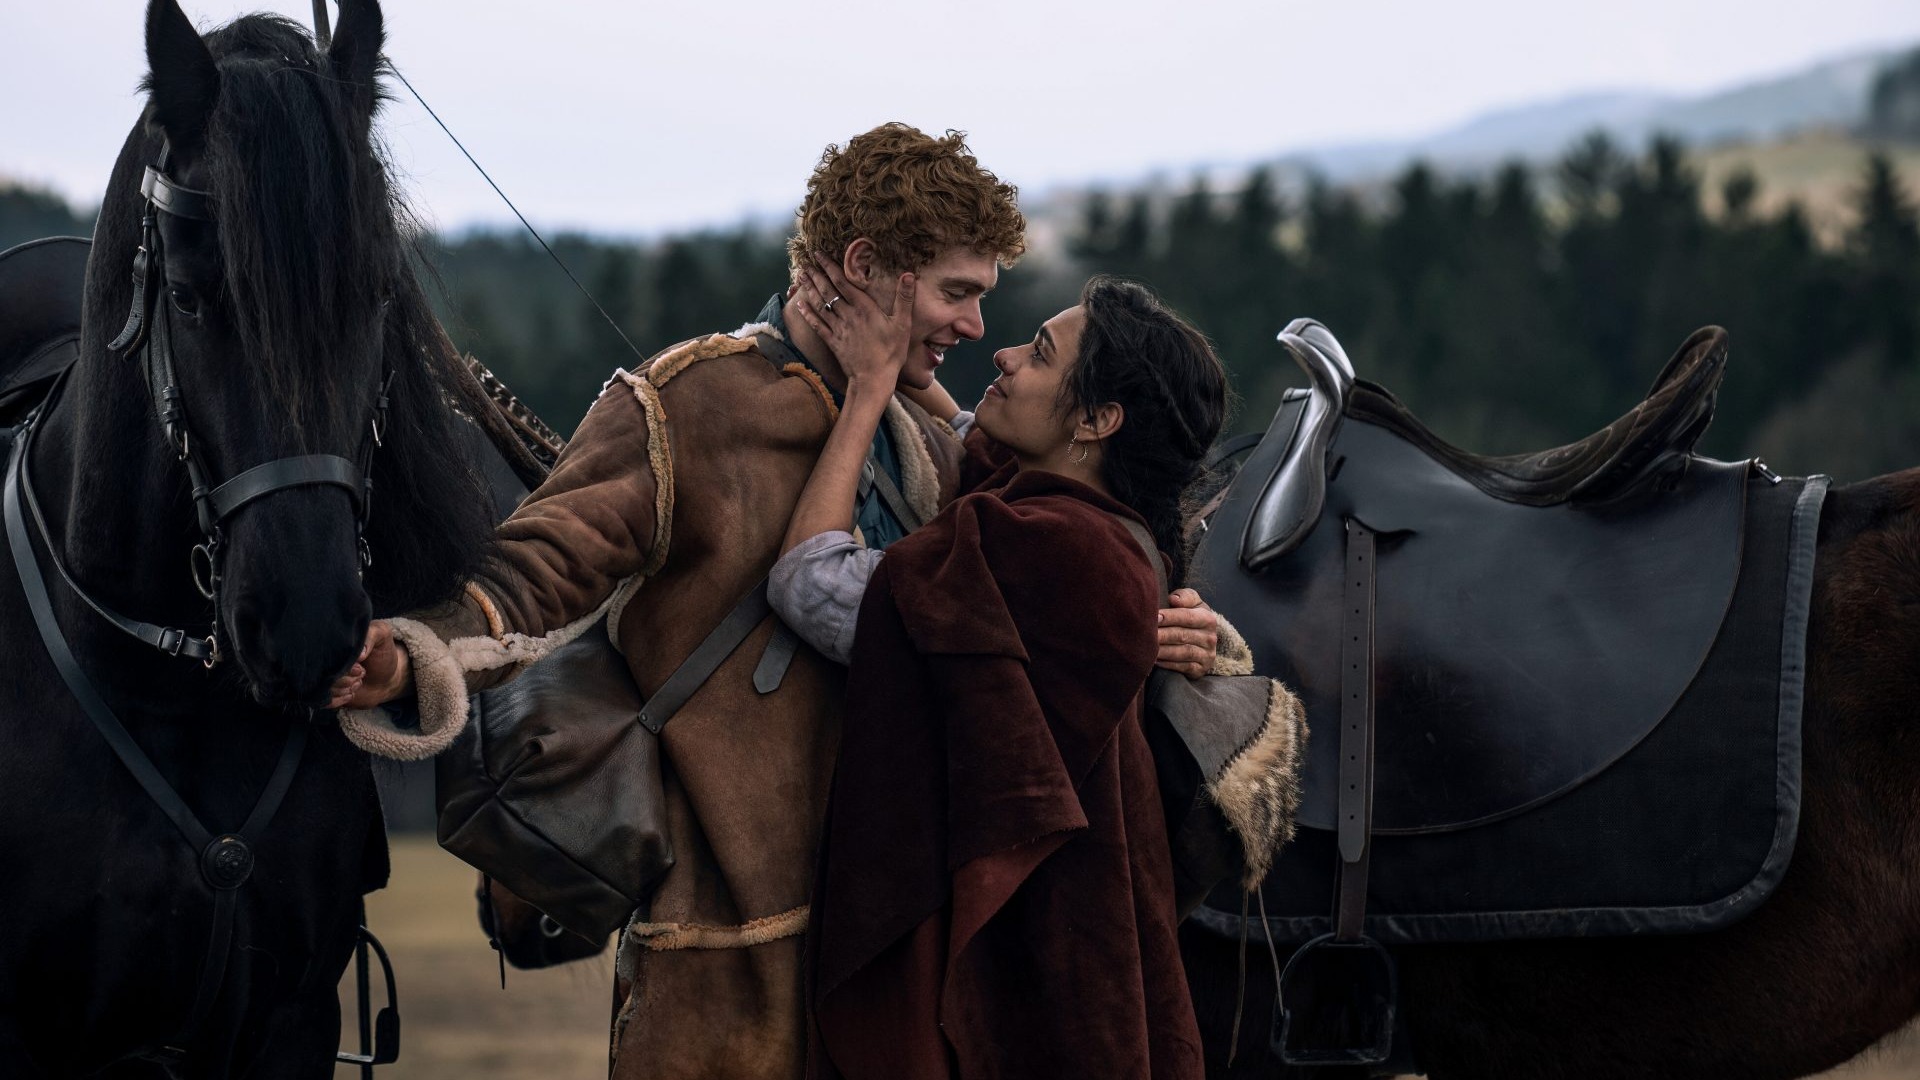 Rand and Egwene share a tender moment in Prime Video's adaptation of The Wheel of Time